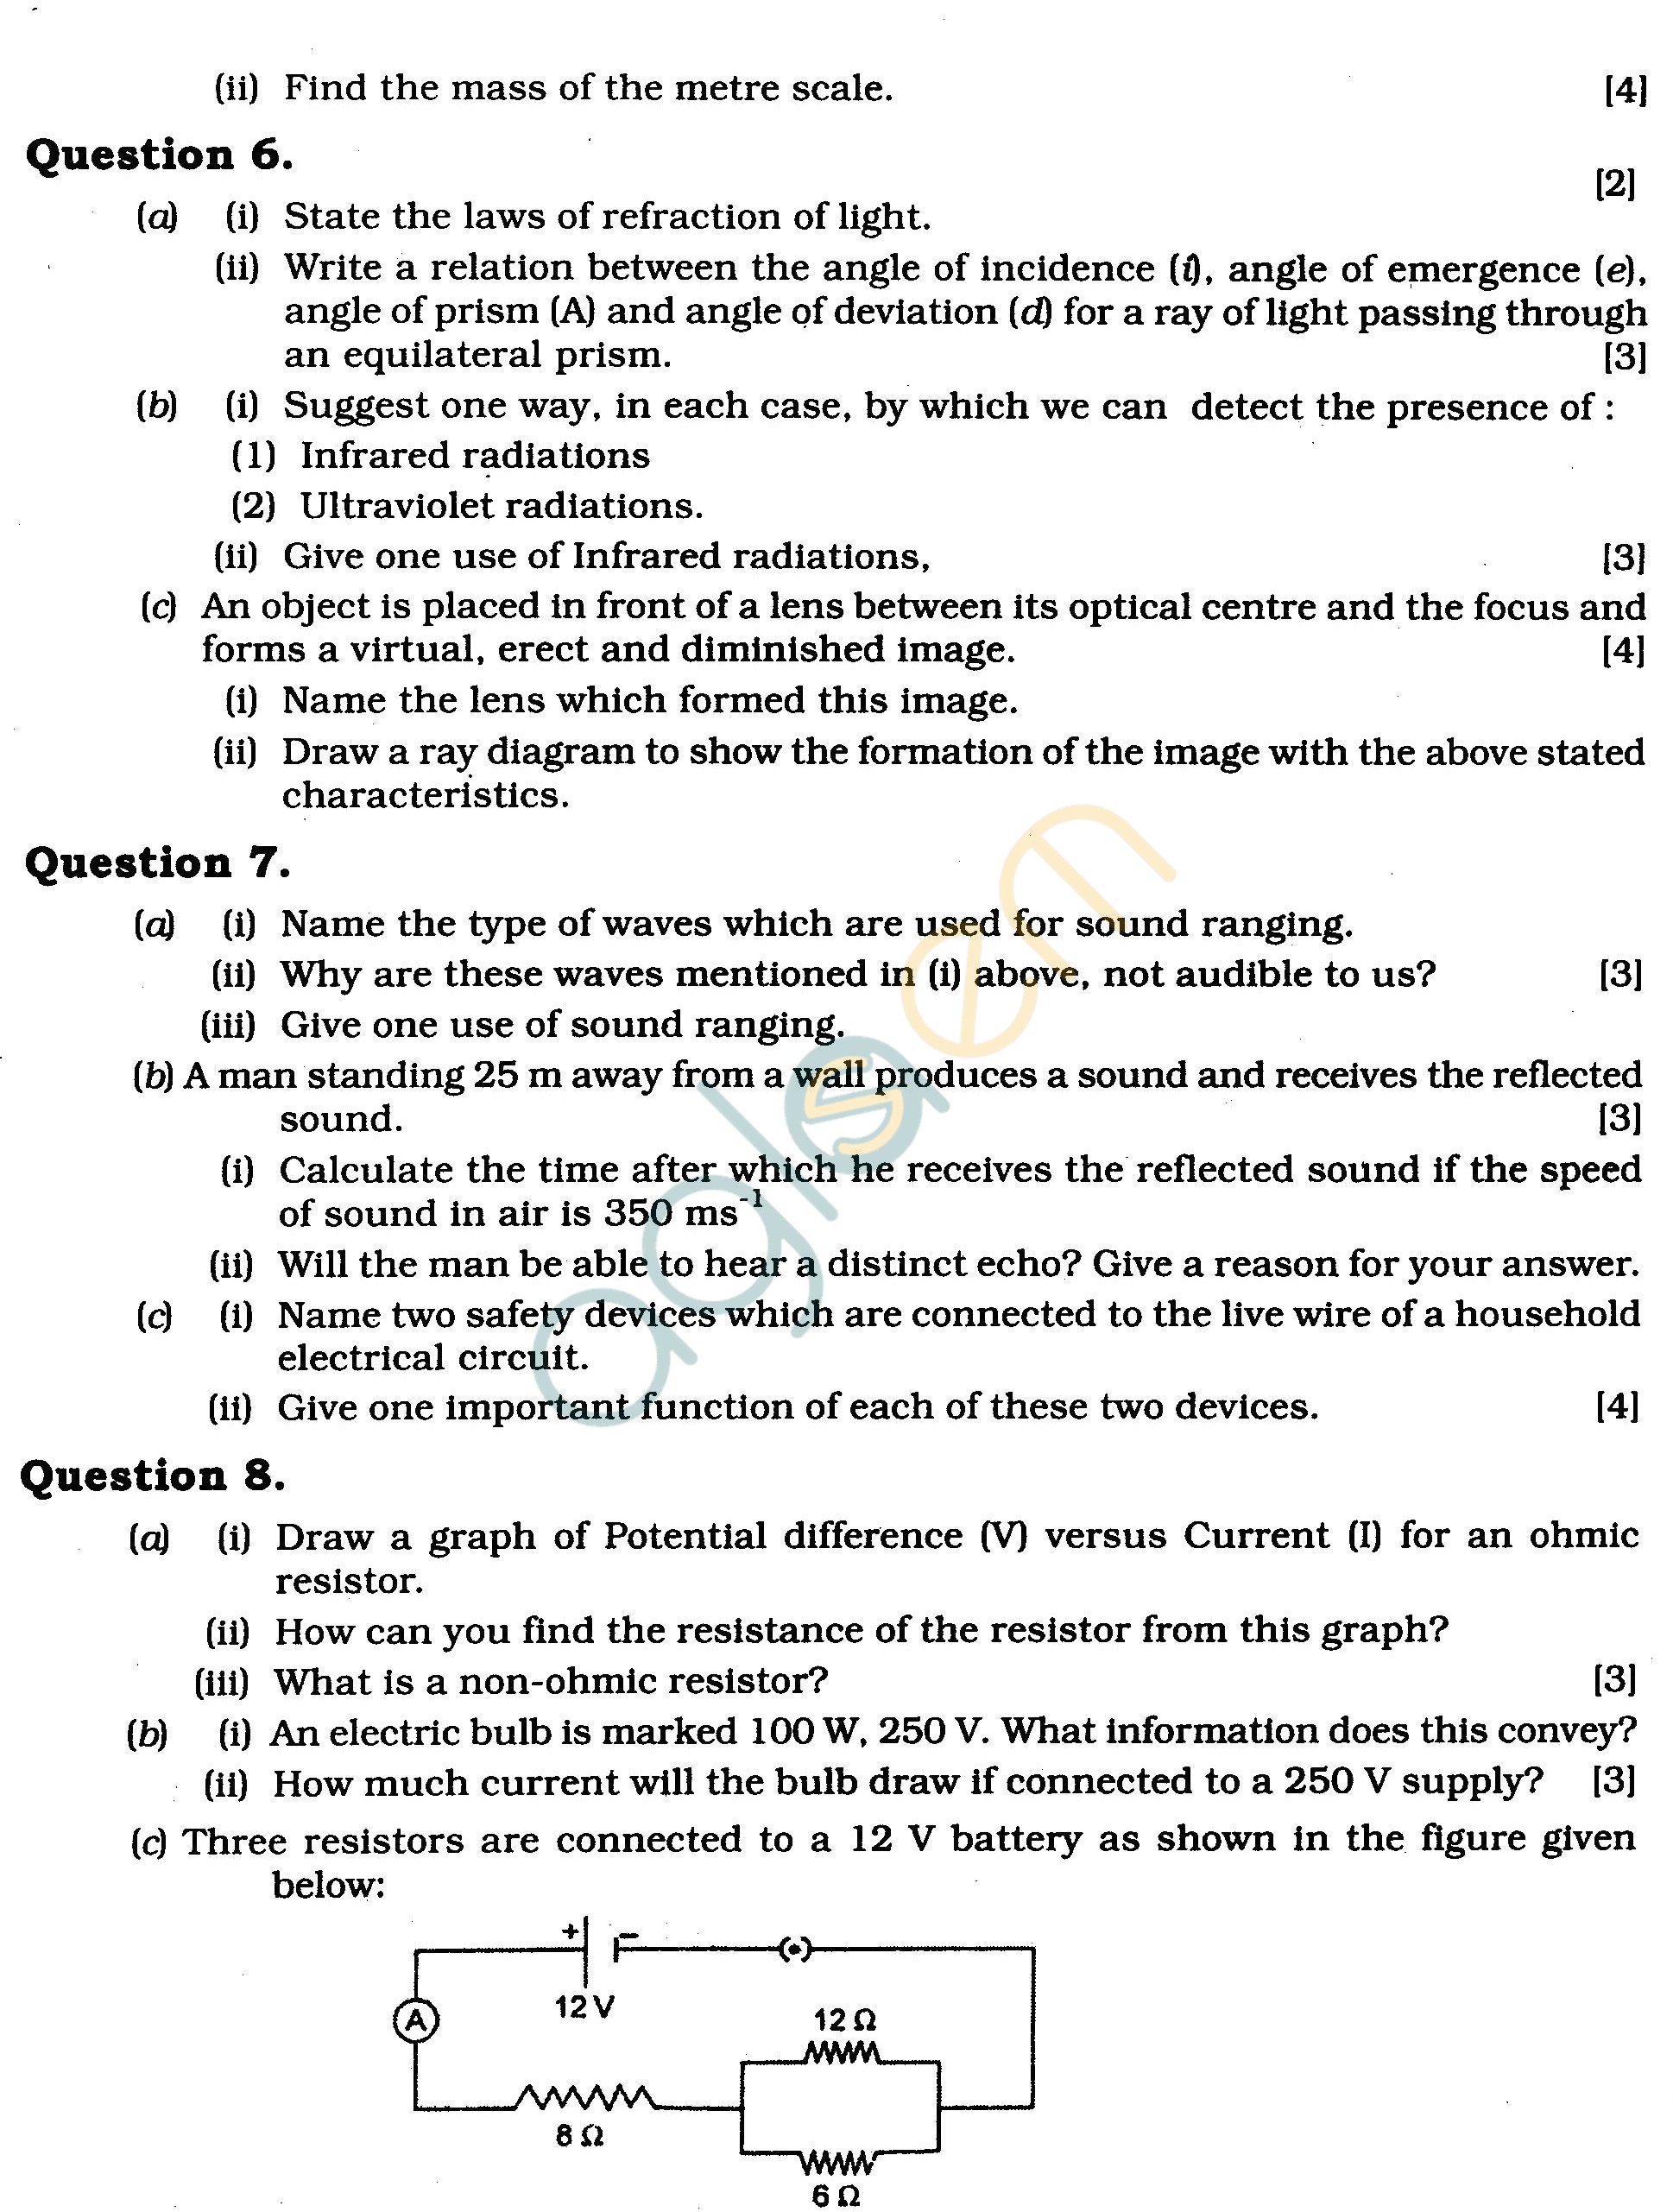 ICSE Class X Exam Question Papers 2011 Physics (Science Paper-1)